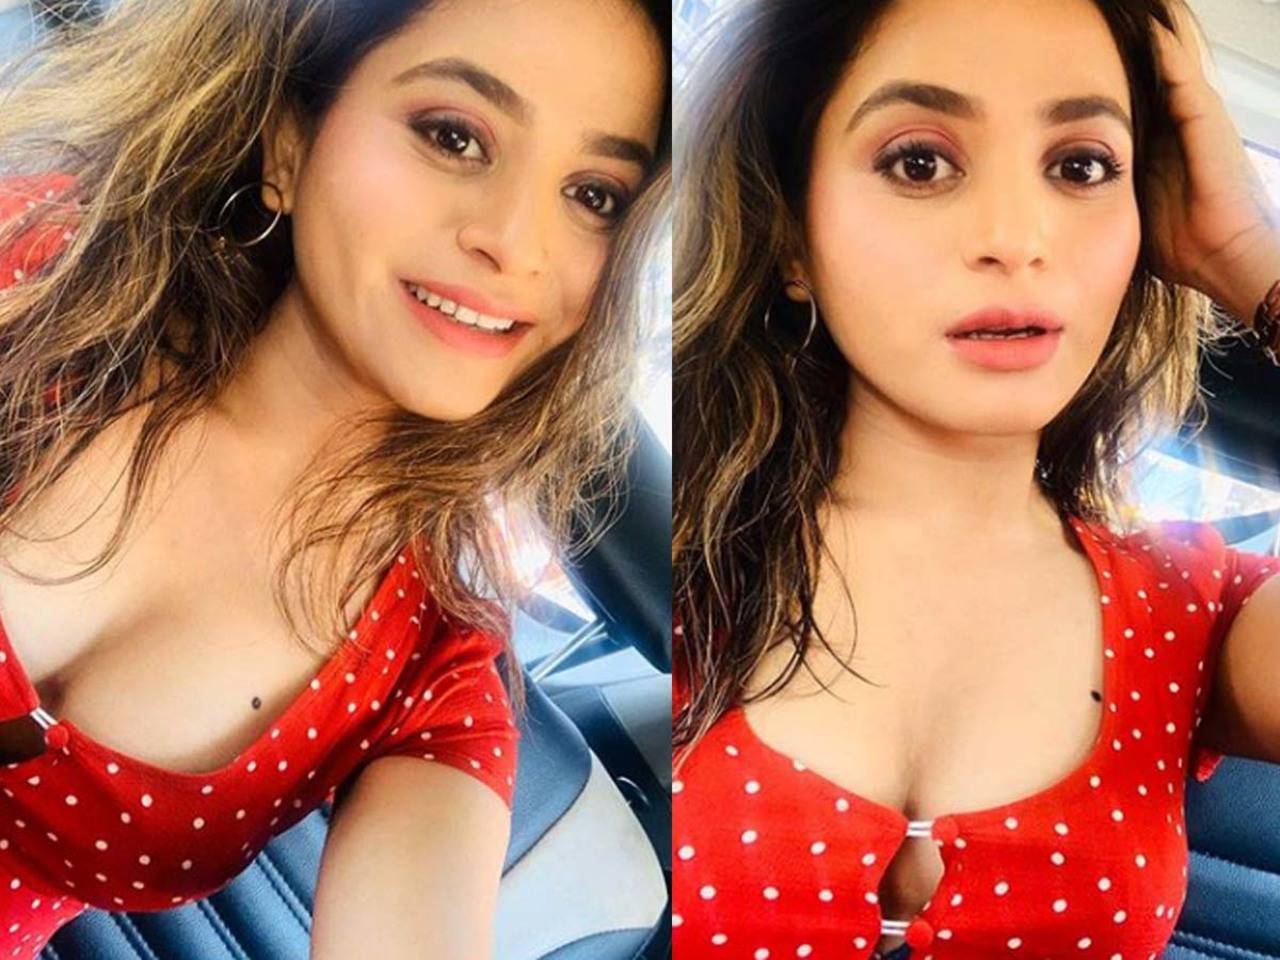 Shubhangi Tambale nails the selfie game as she poses like a pro ...